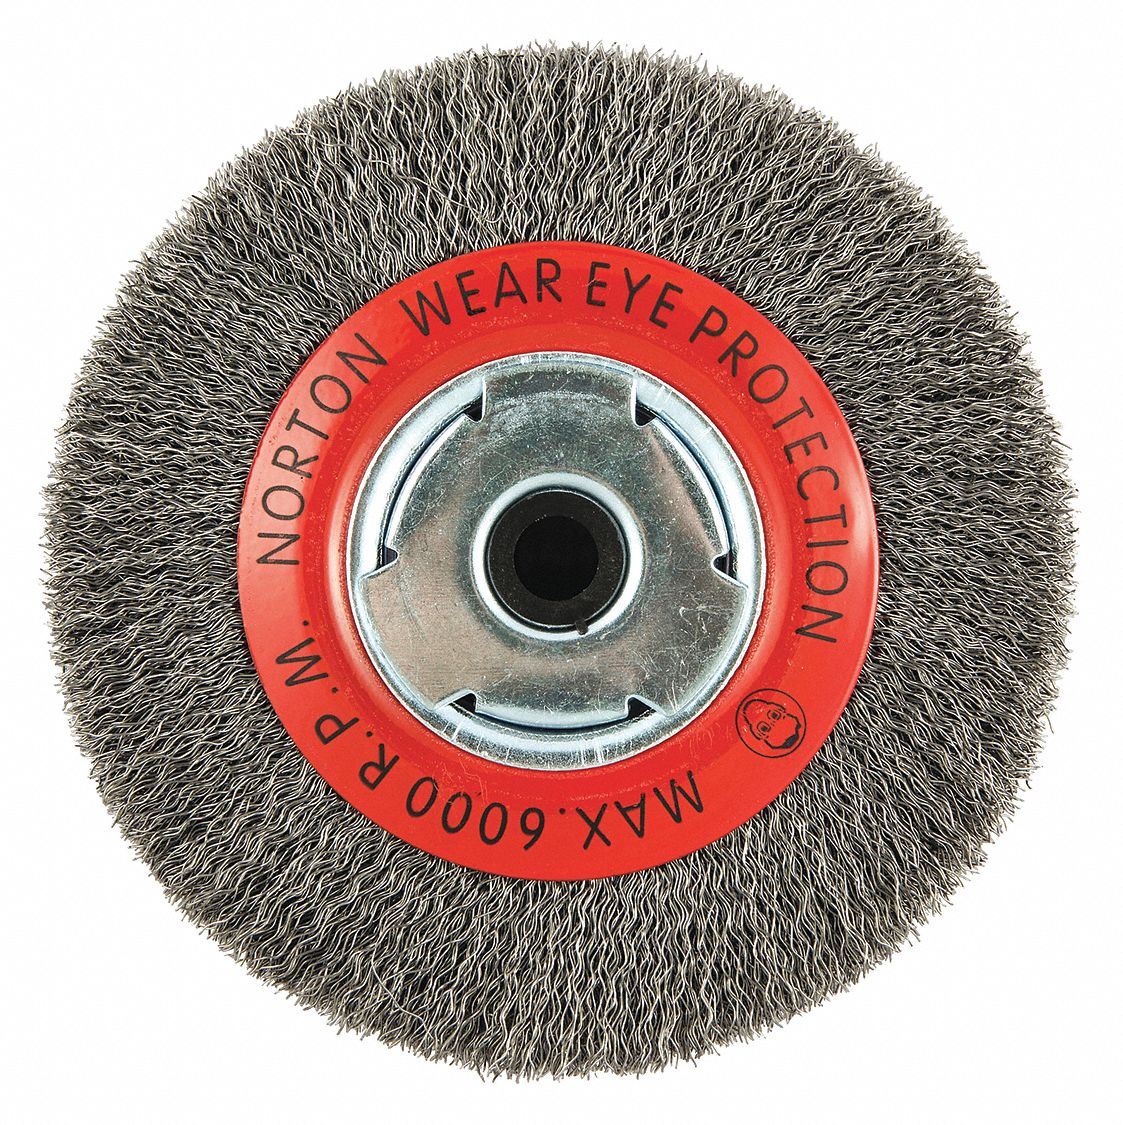 Wire Wheel Brush: 6 in Brush Dia., 5/8 in Arbor Hole, 0.014 in Wire Dia., Carbon Steel